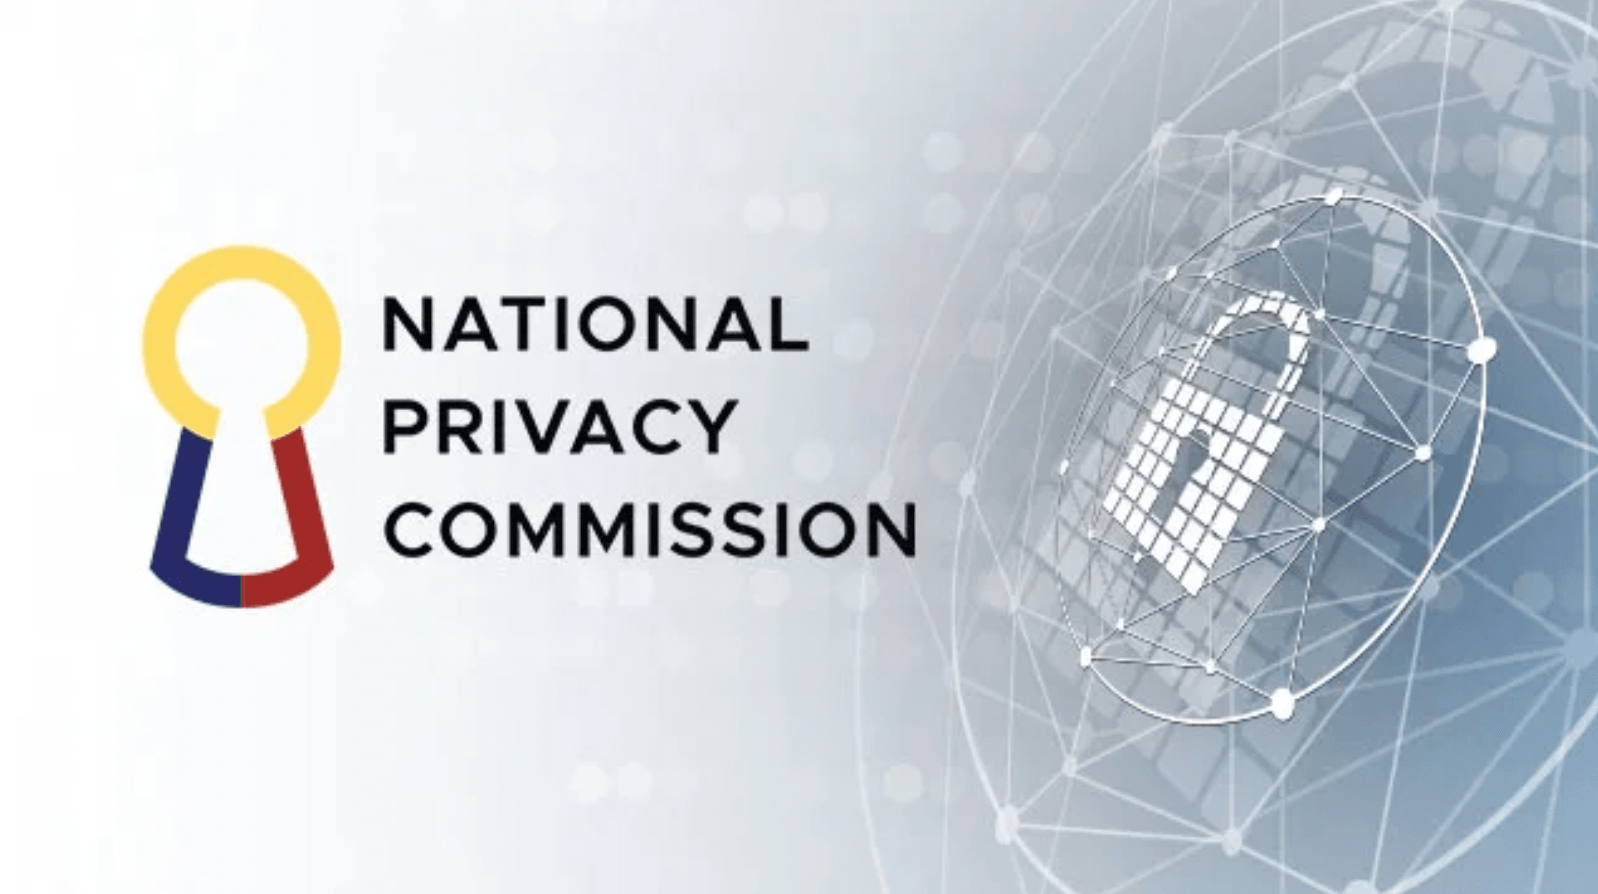 National Privacy Commission receives bomb threat on Facebook post, workers evacuated